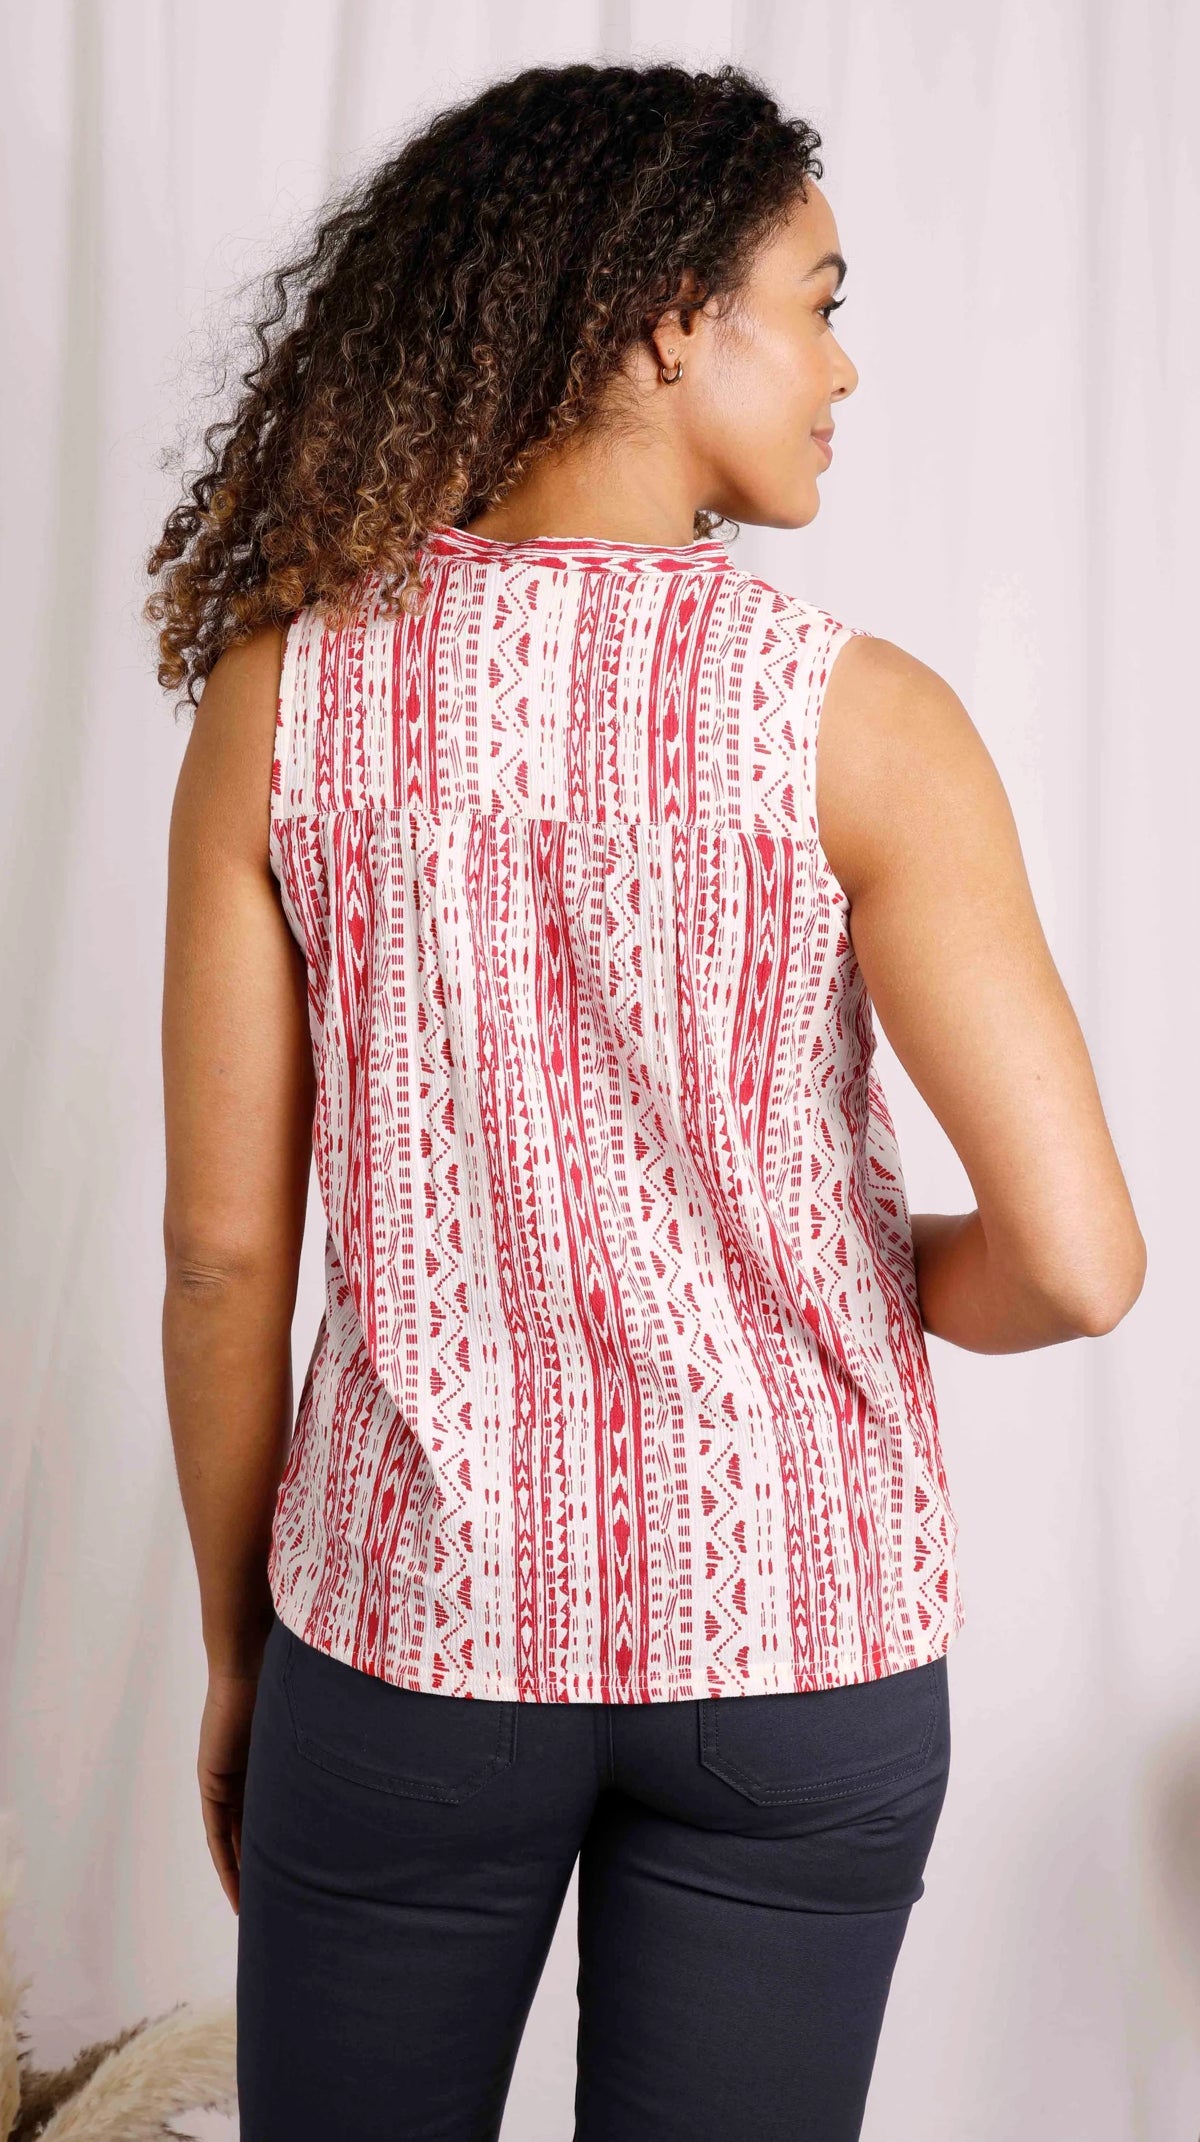 Women's Aztec style printed Atika vest from Weird Fish in rouge and white.